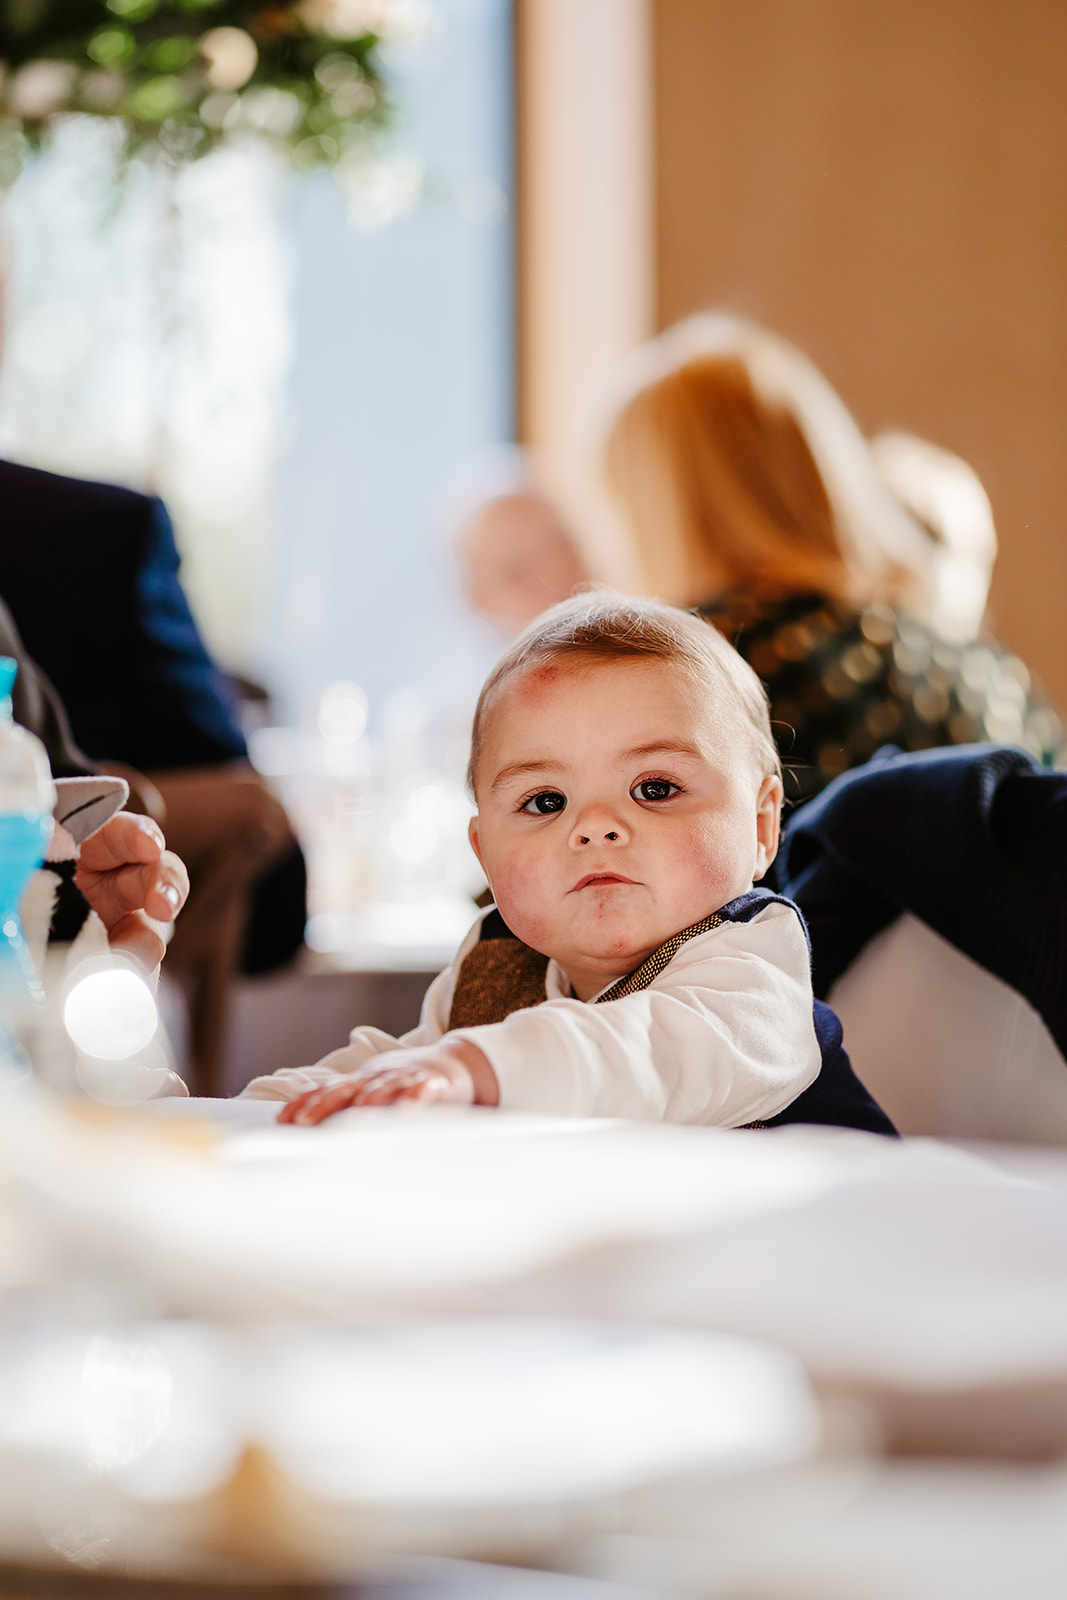 Baby staring over a table